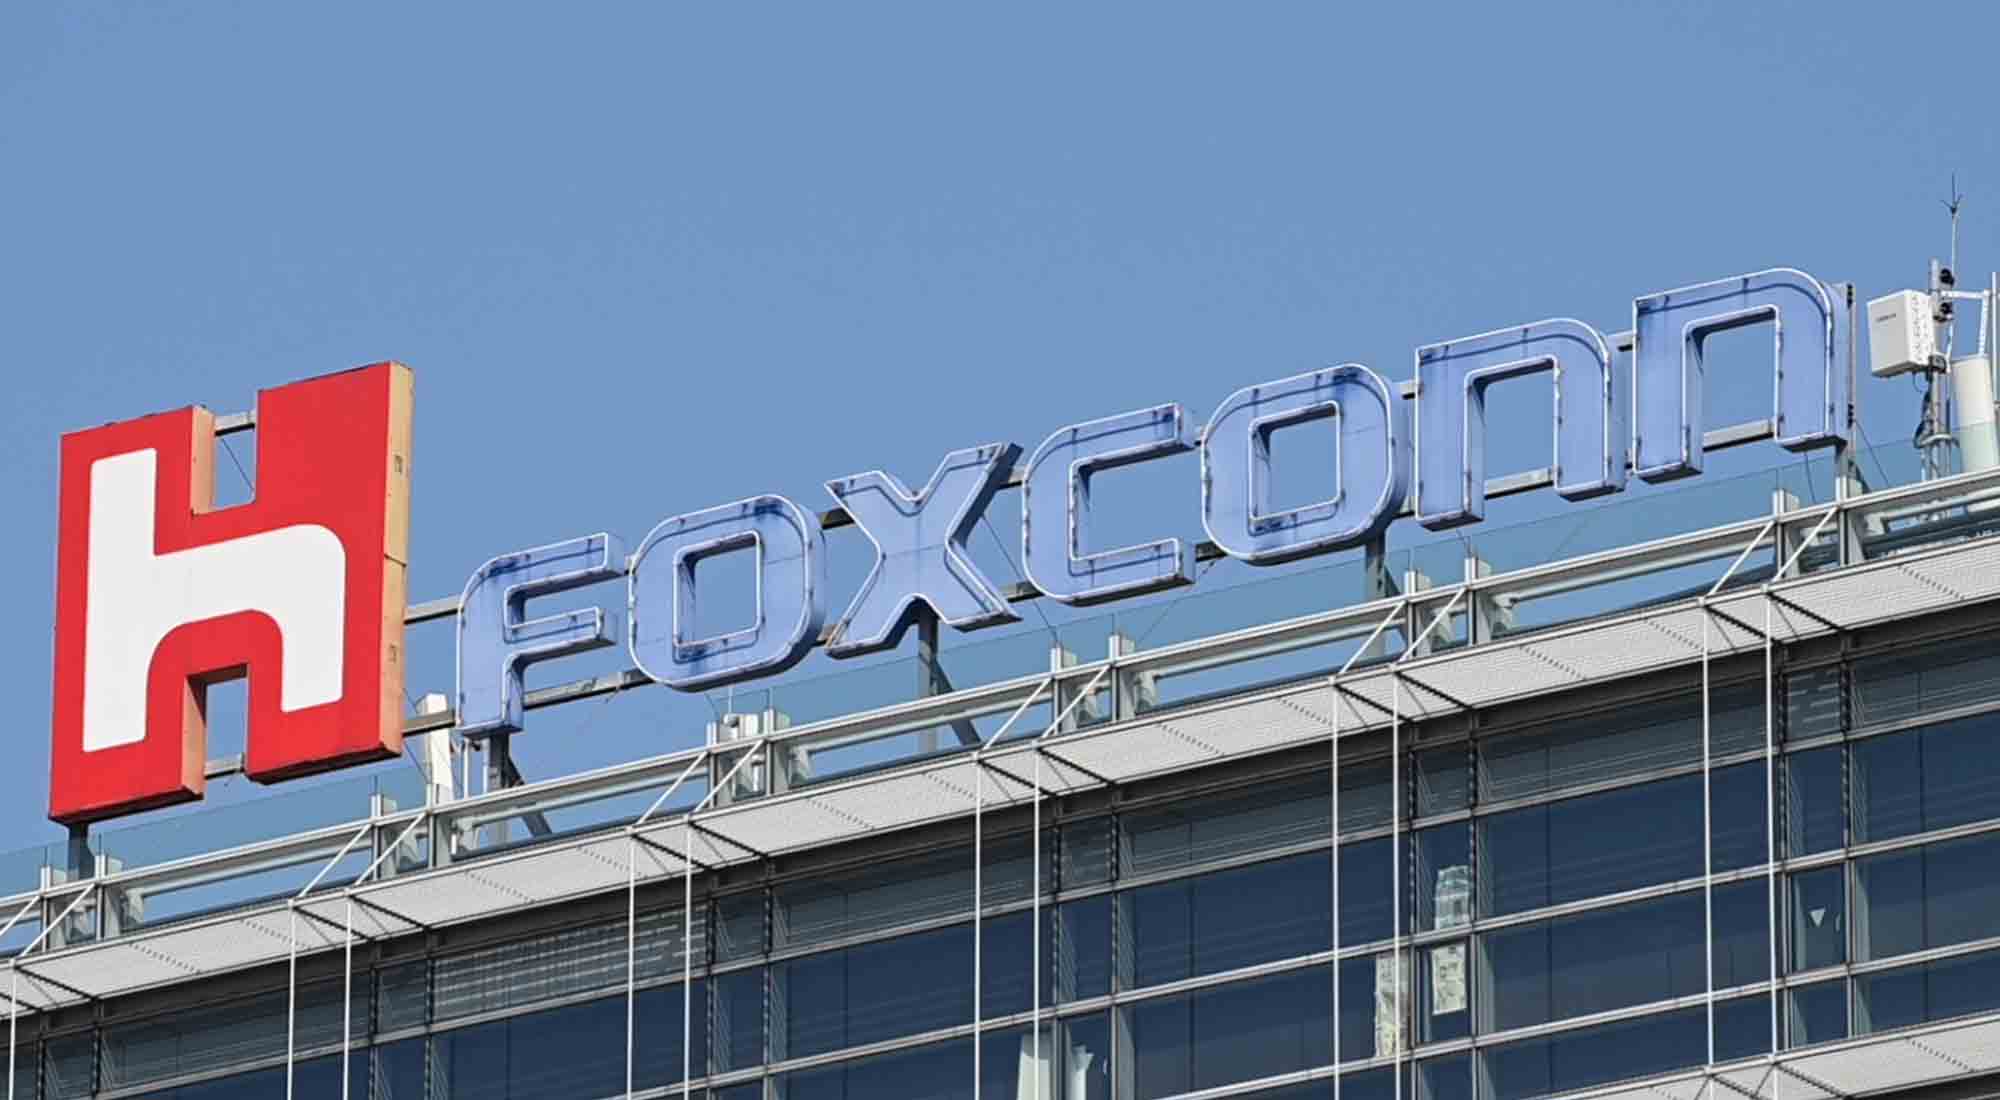 Foxconn Secures License to Invest an Additional $551 Million in Vietnam, Media Reports